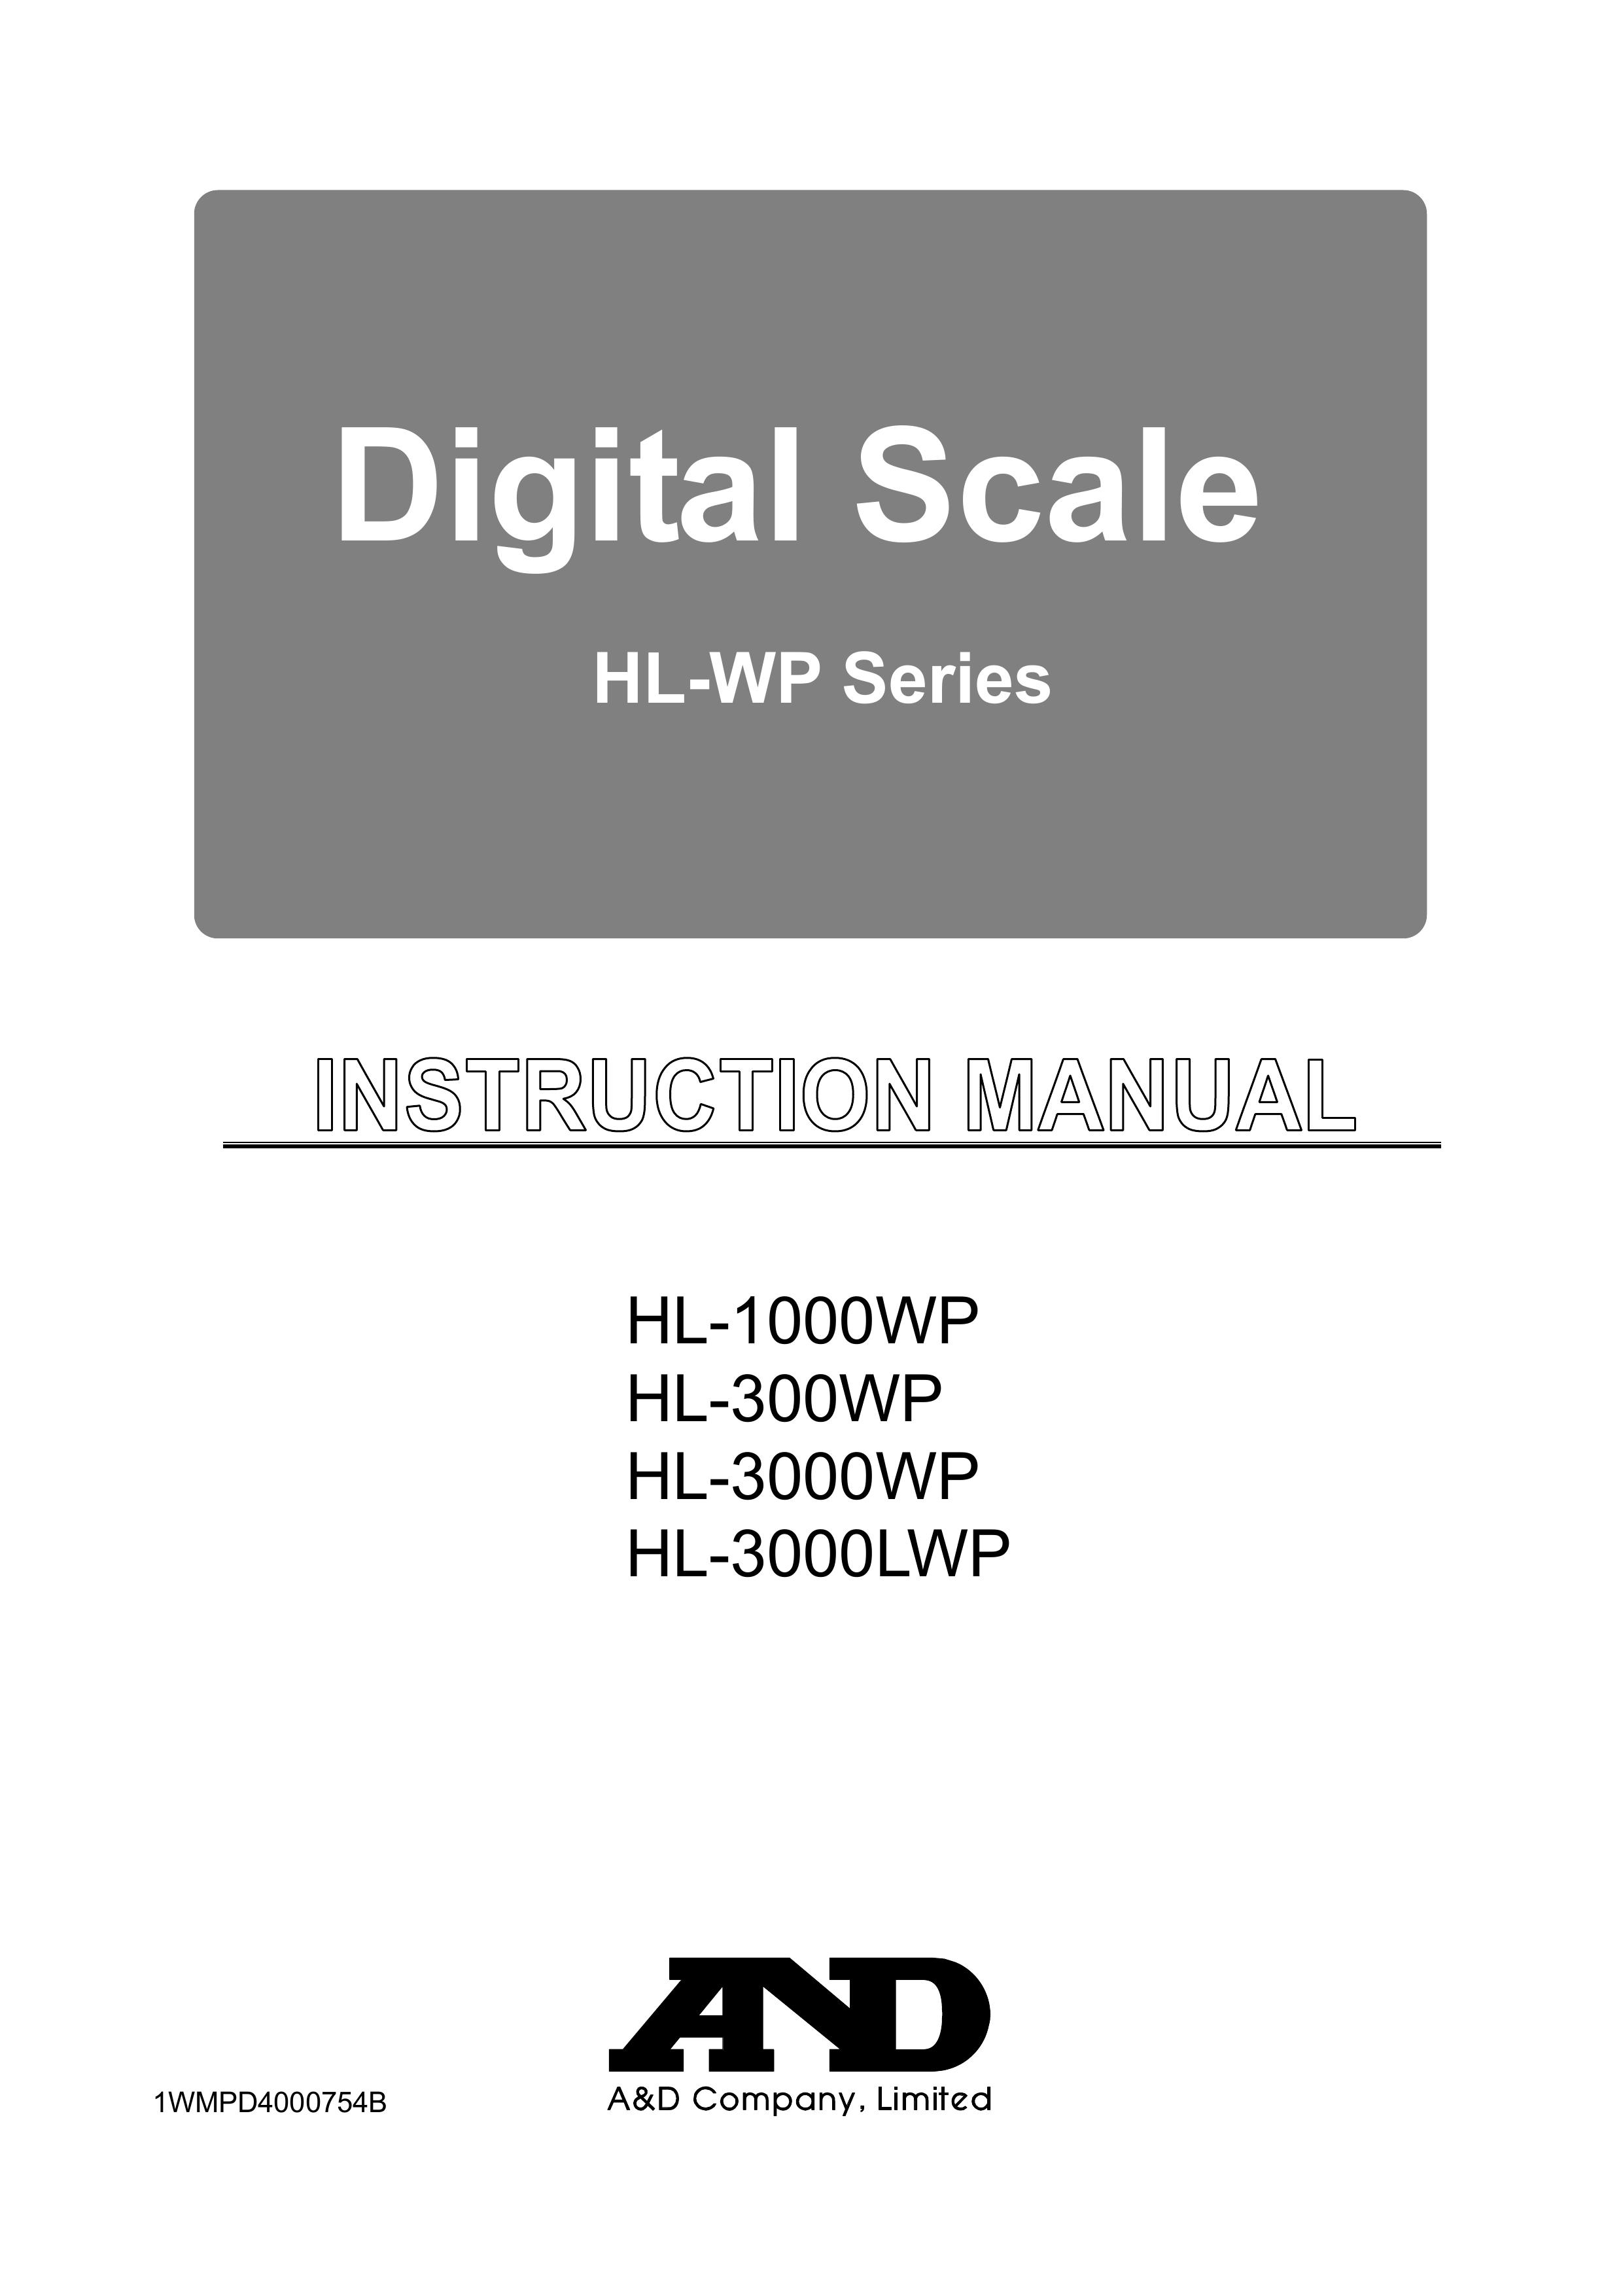 A&D HL-300WP Scale User Manual